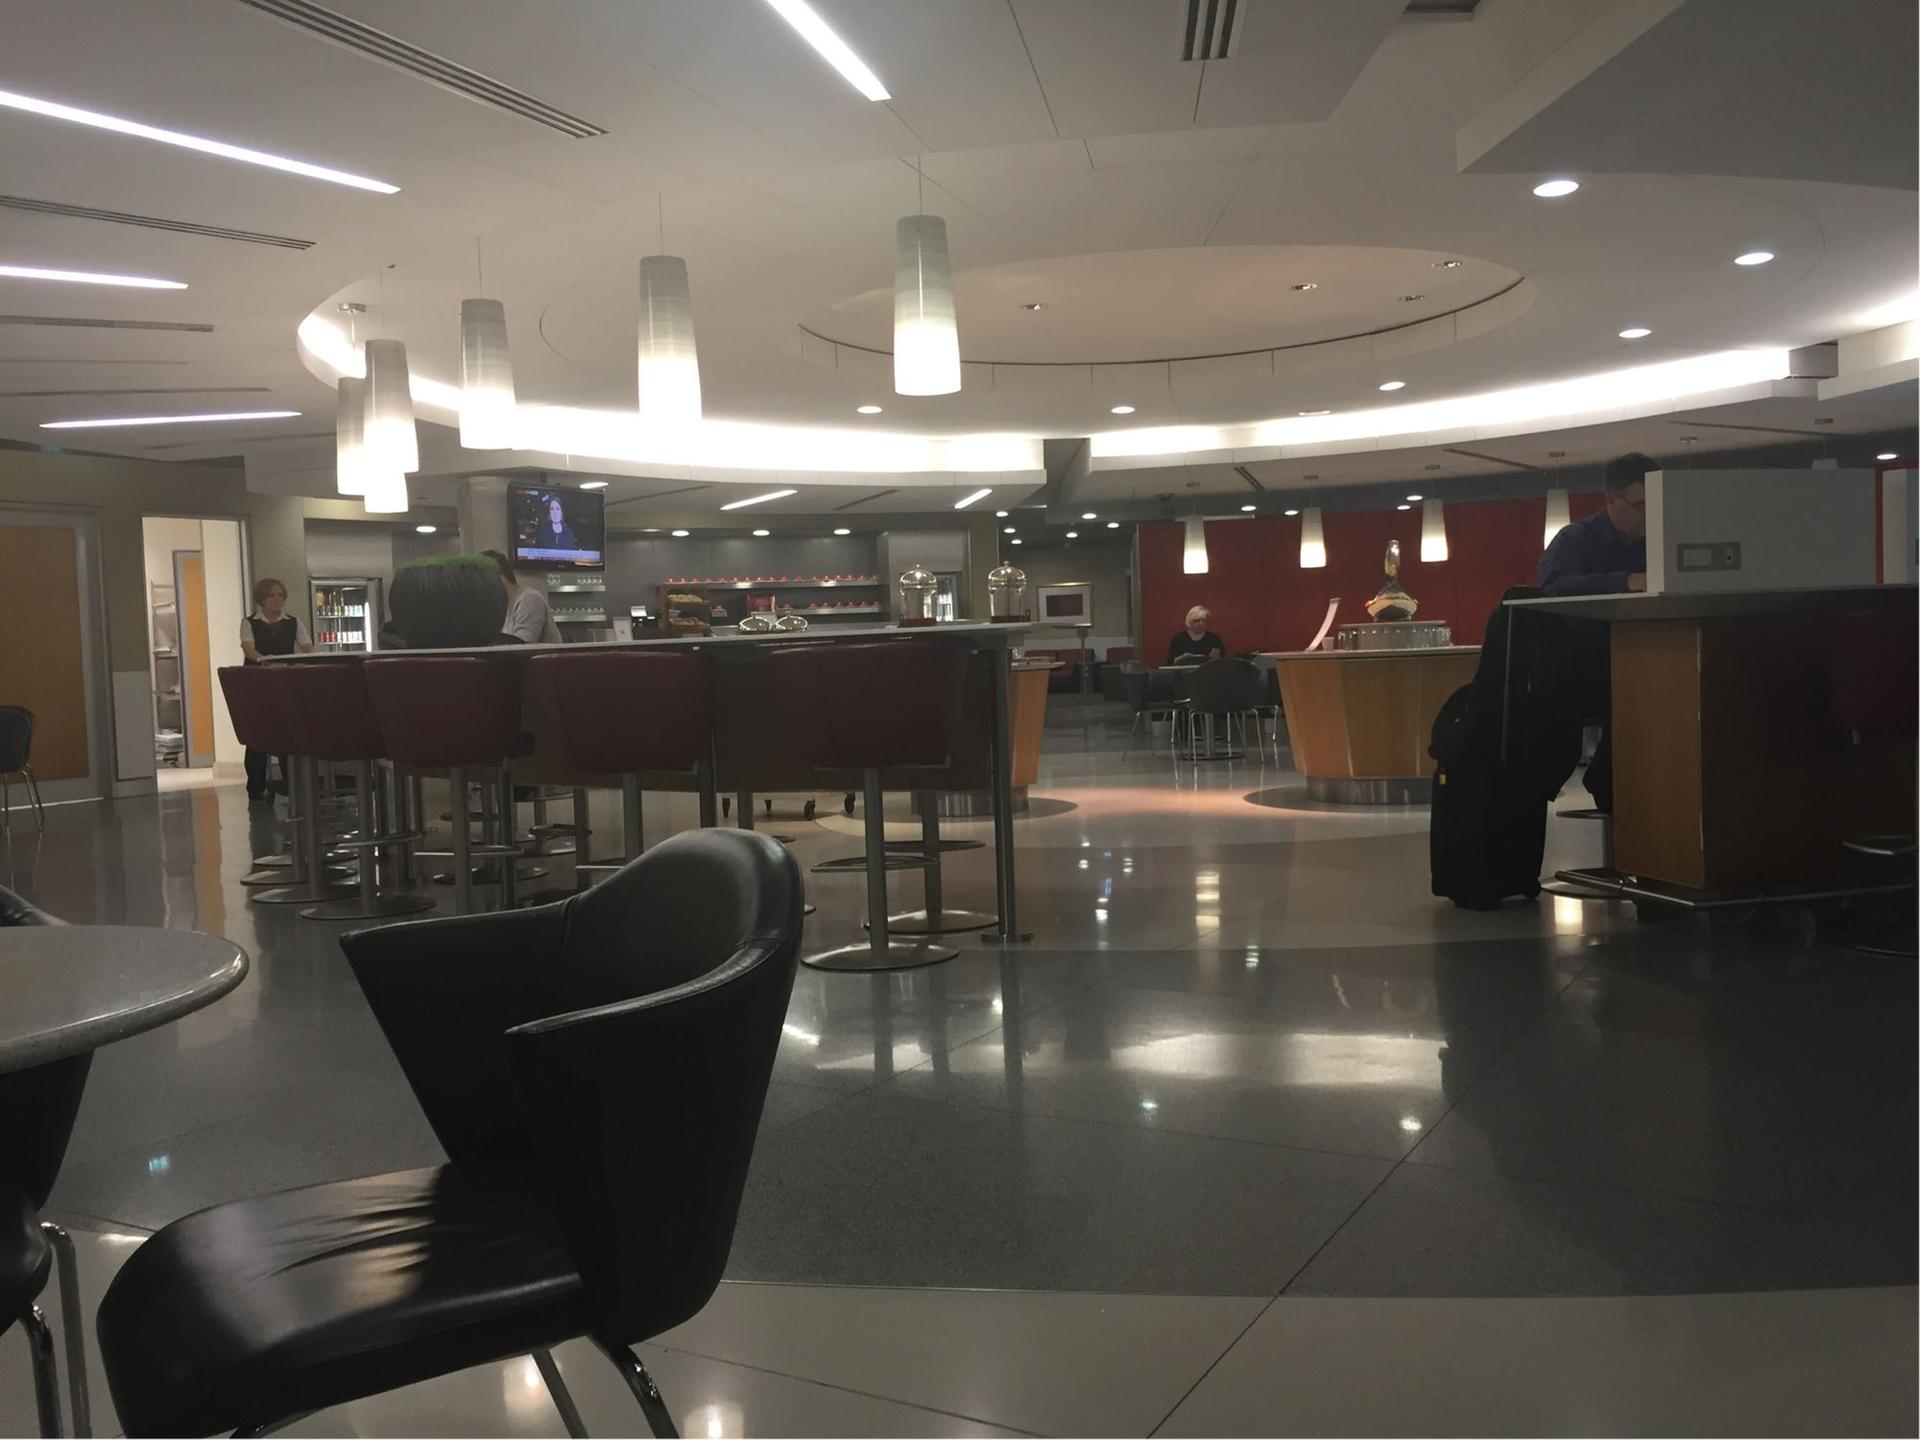 American Airlines Admirals Club image 26 of 38